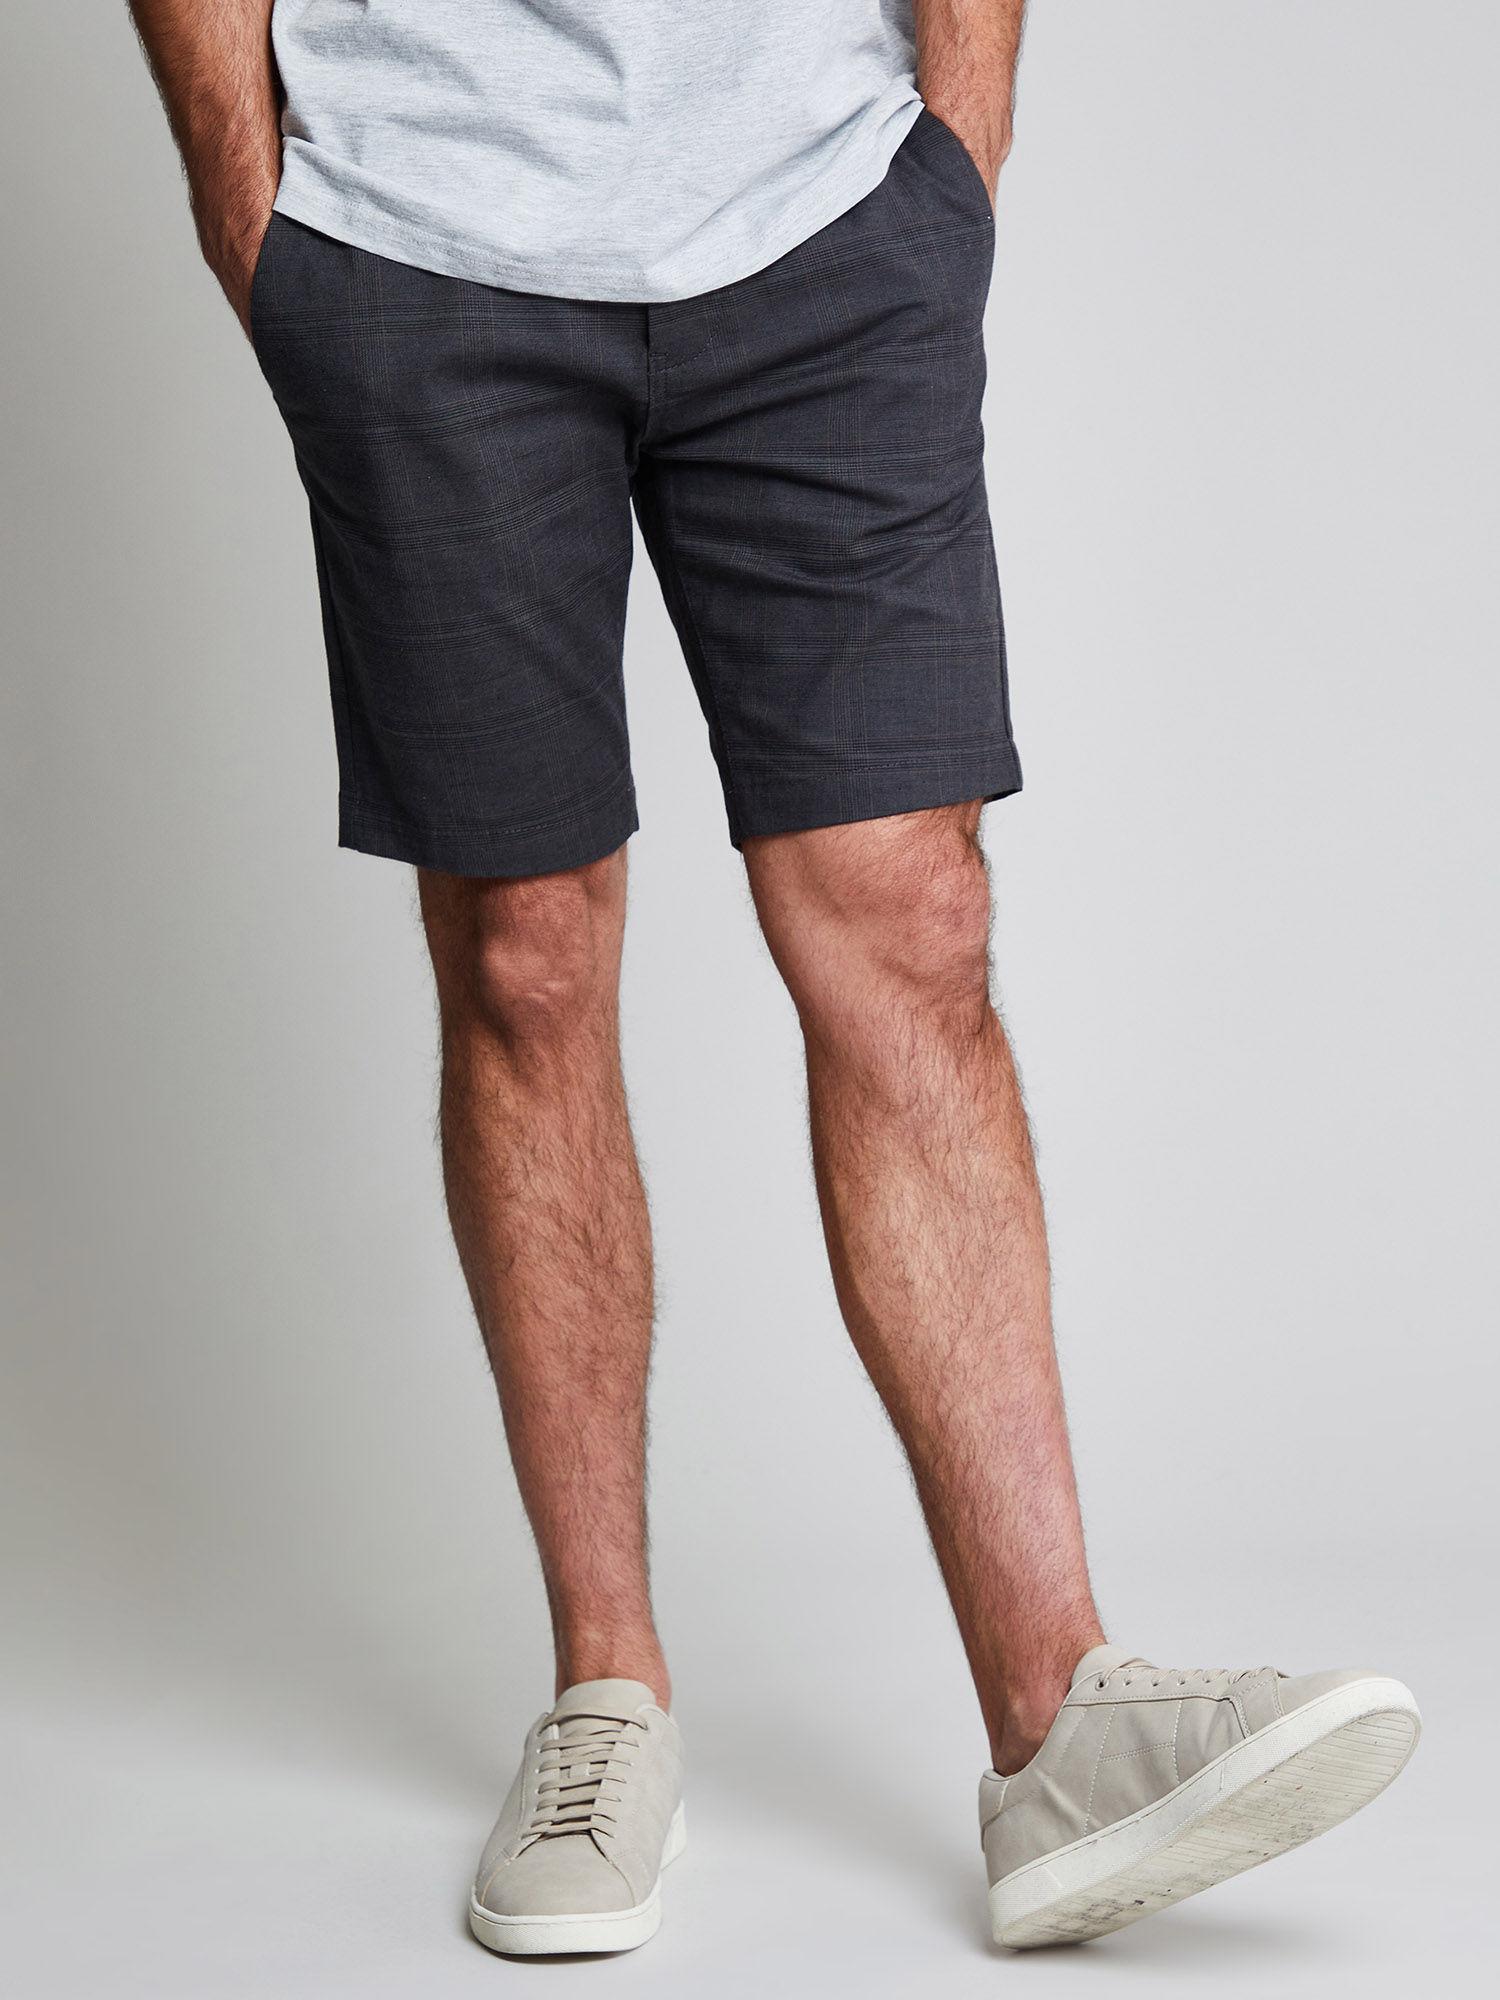 luxe-men-charcoal-check-slim-fit-chino-shorts